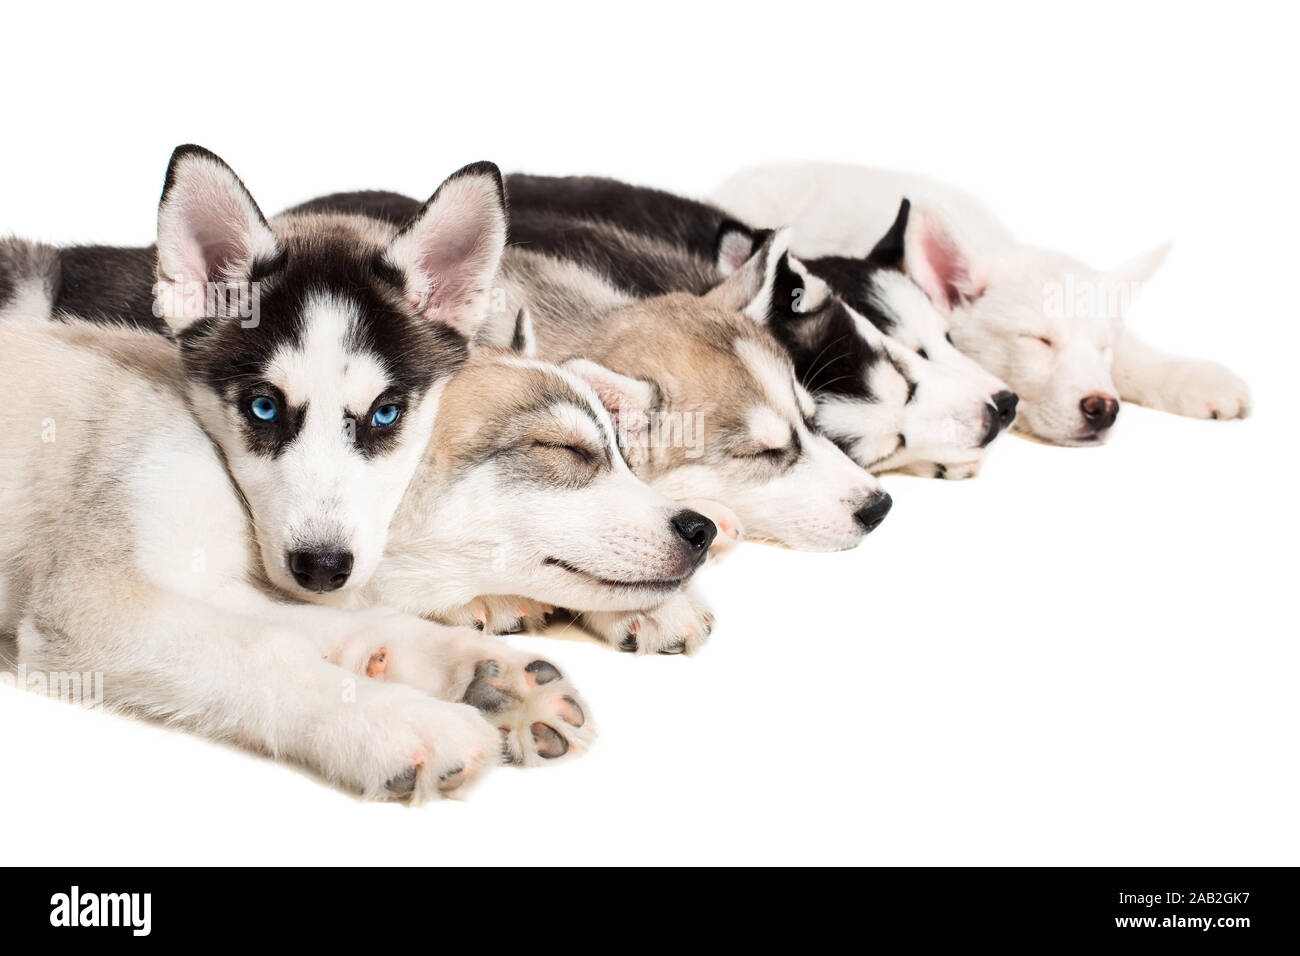 Group Of Puppies Breed The Huskies Isolated On White Background Stock Photo Alamy